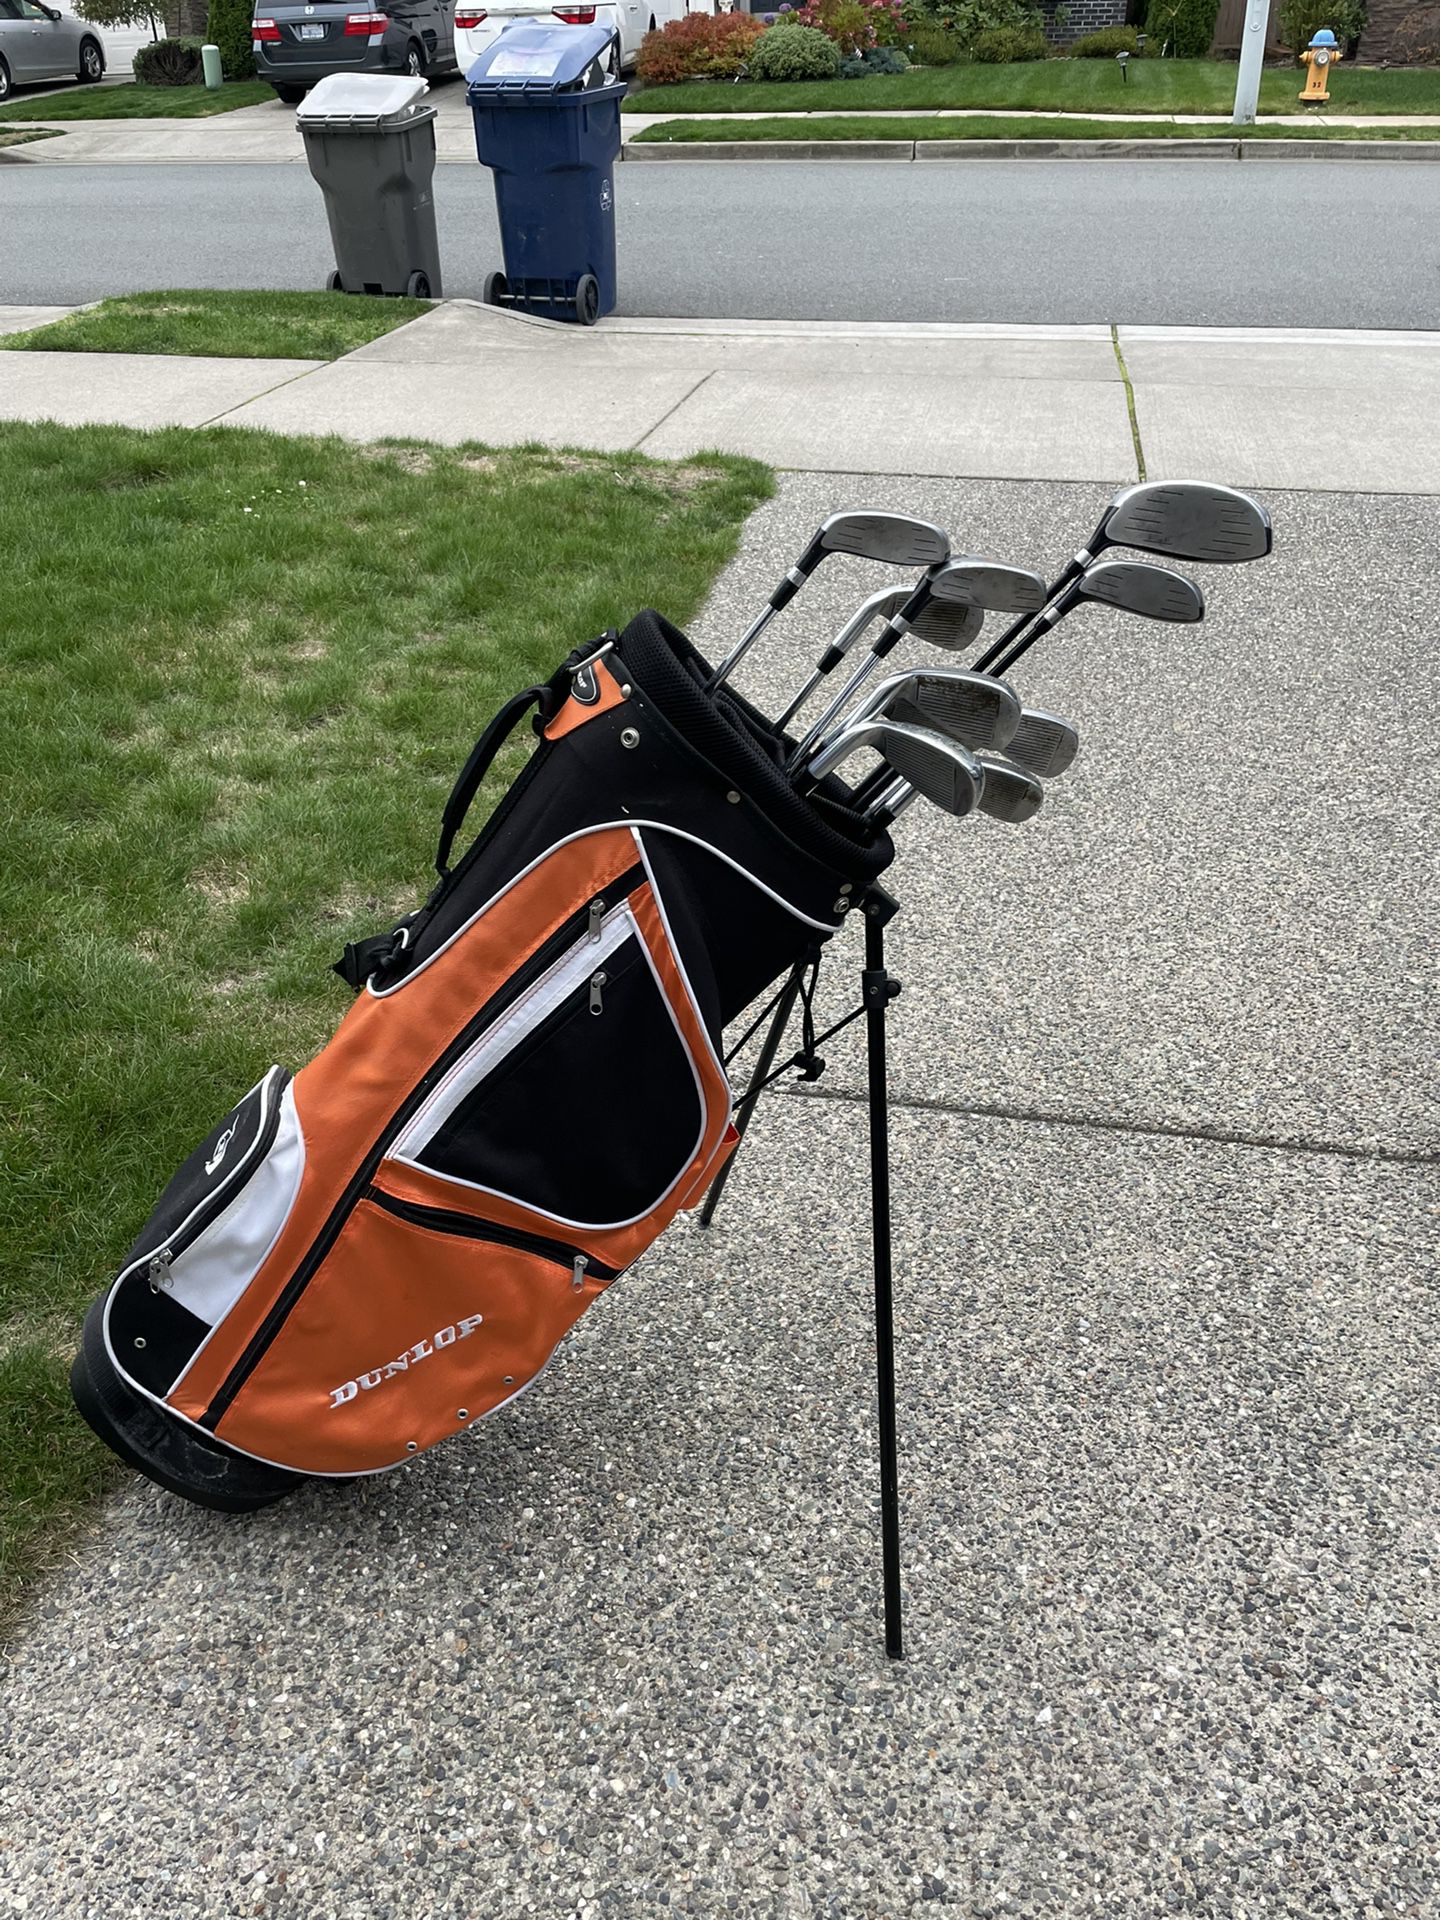 Clubs and Golf Bag